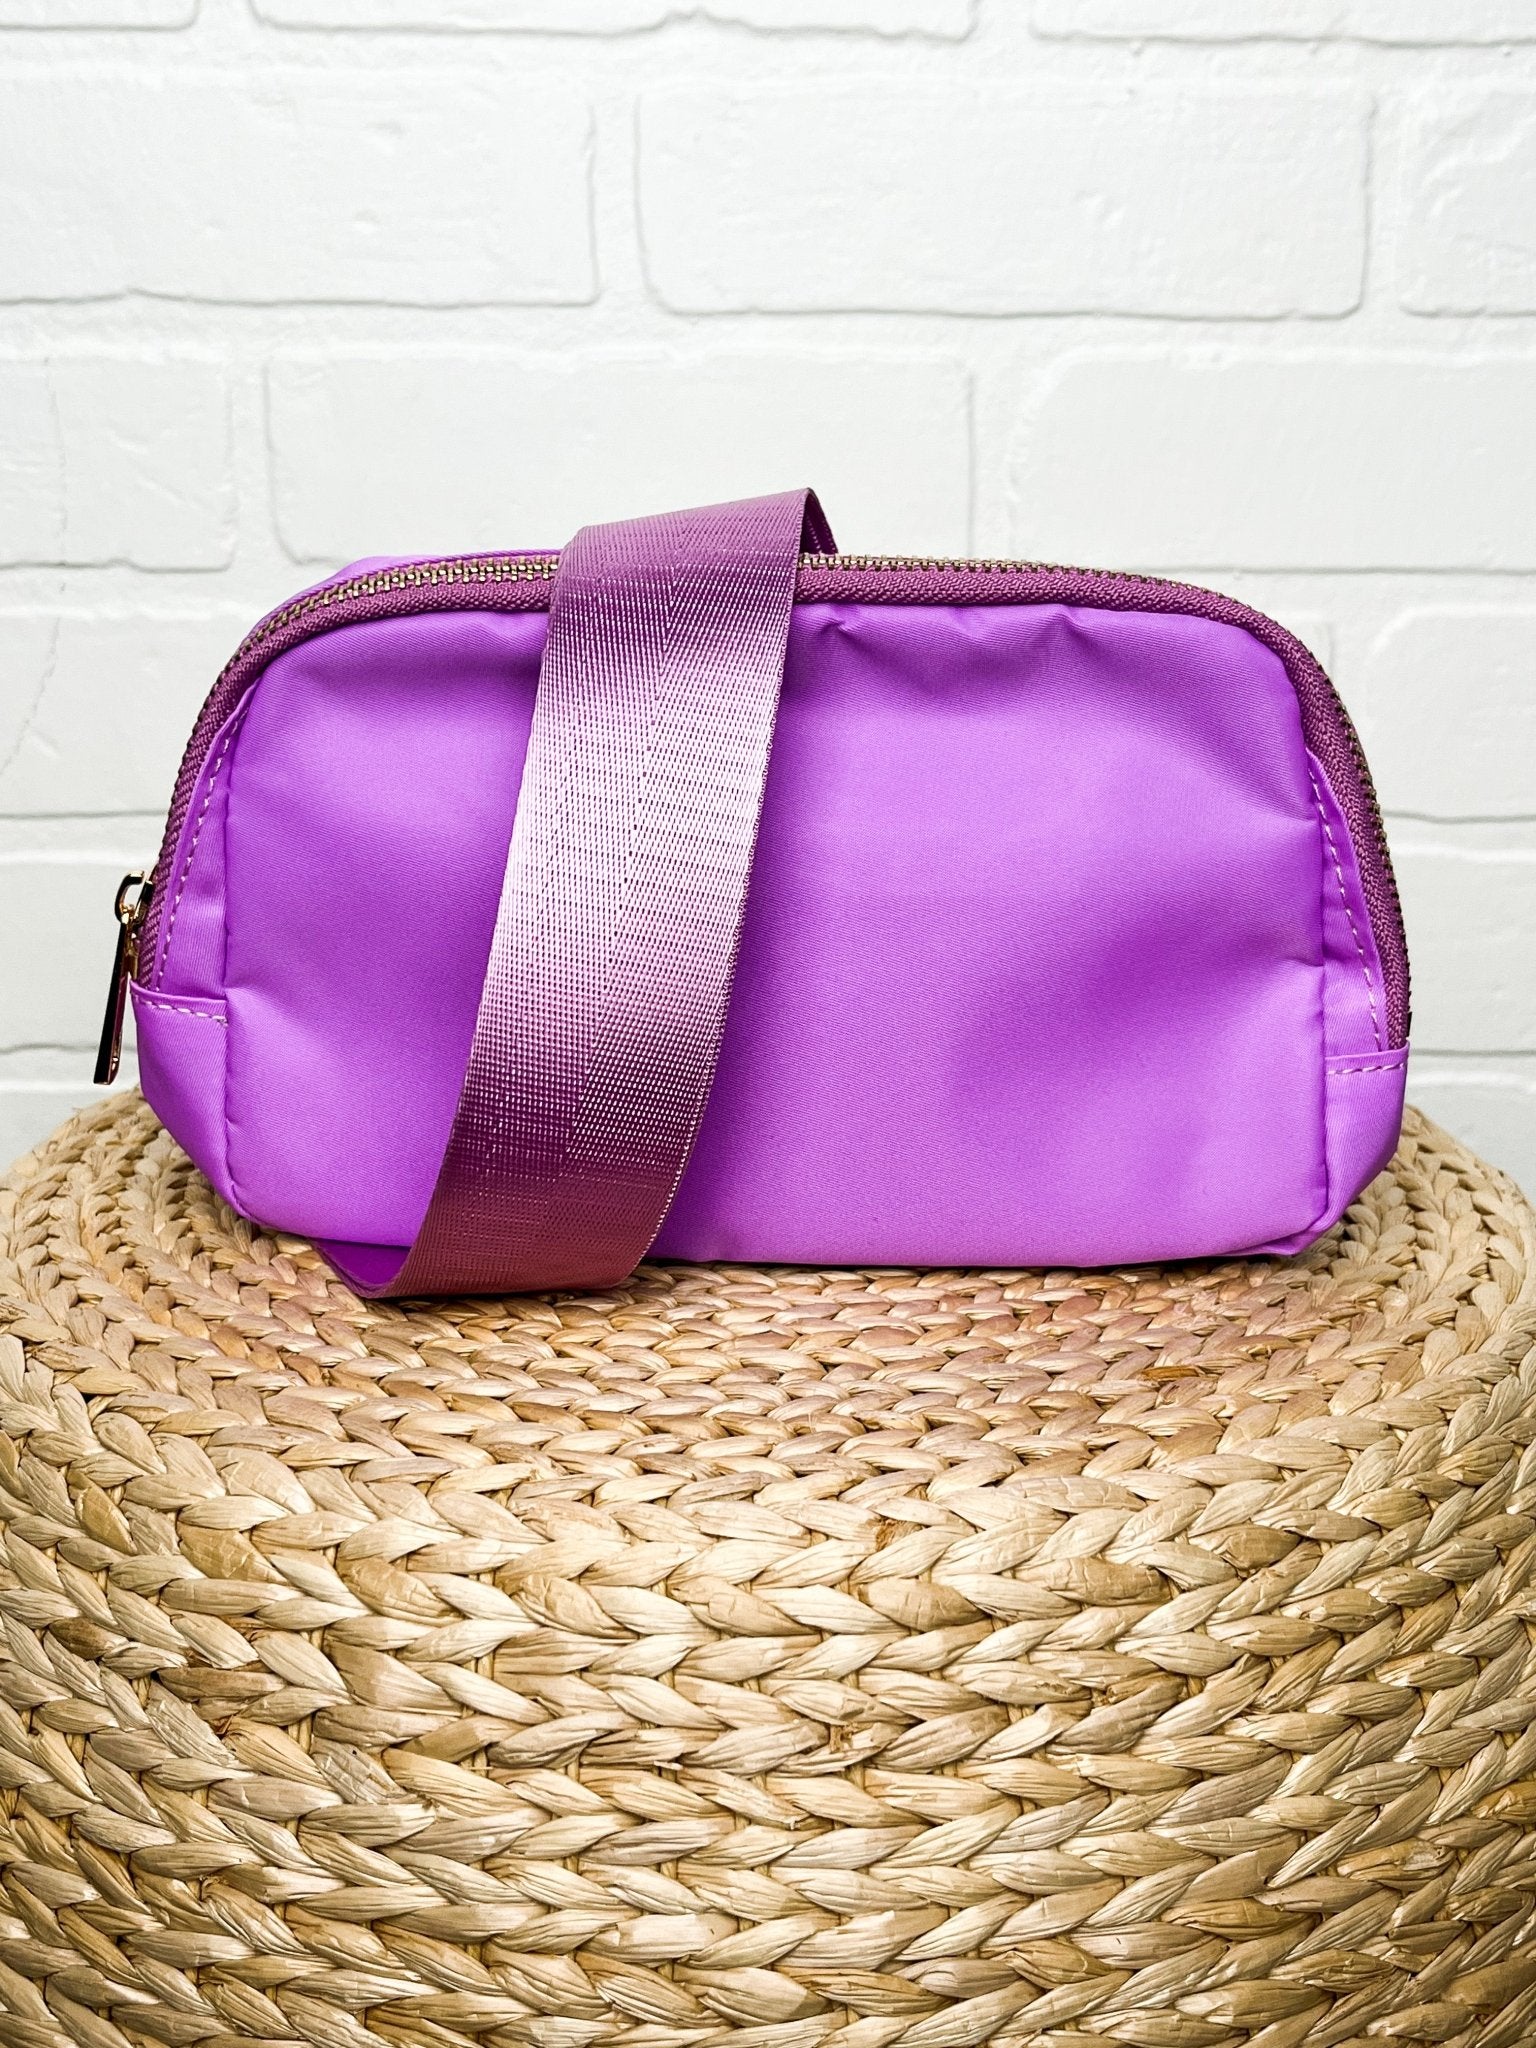 Sling belt bag lavender - Trendy Bags at Lush Fashion Lounge Boutique in Oklahoma City